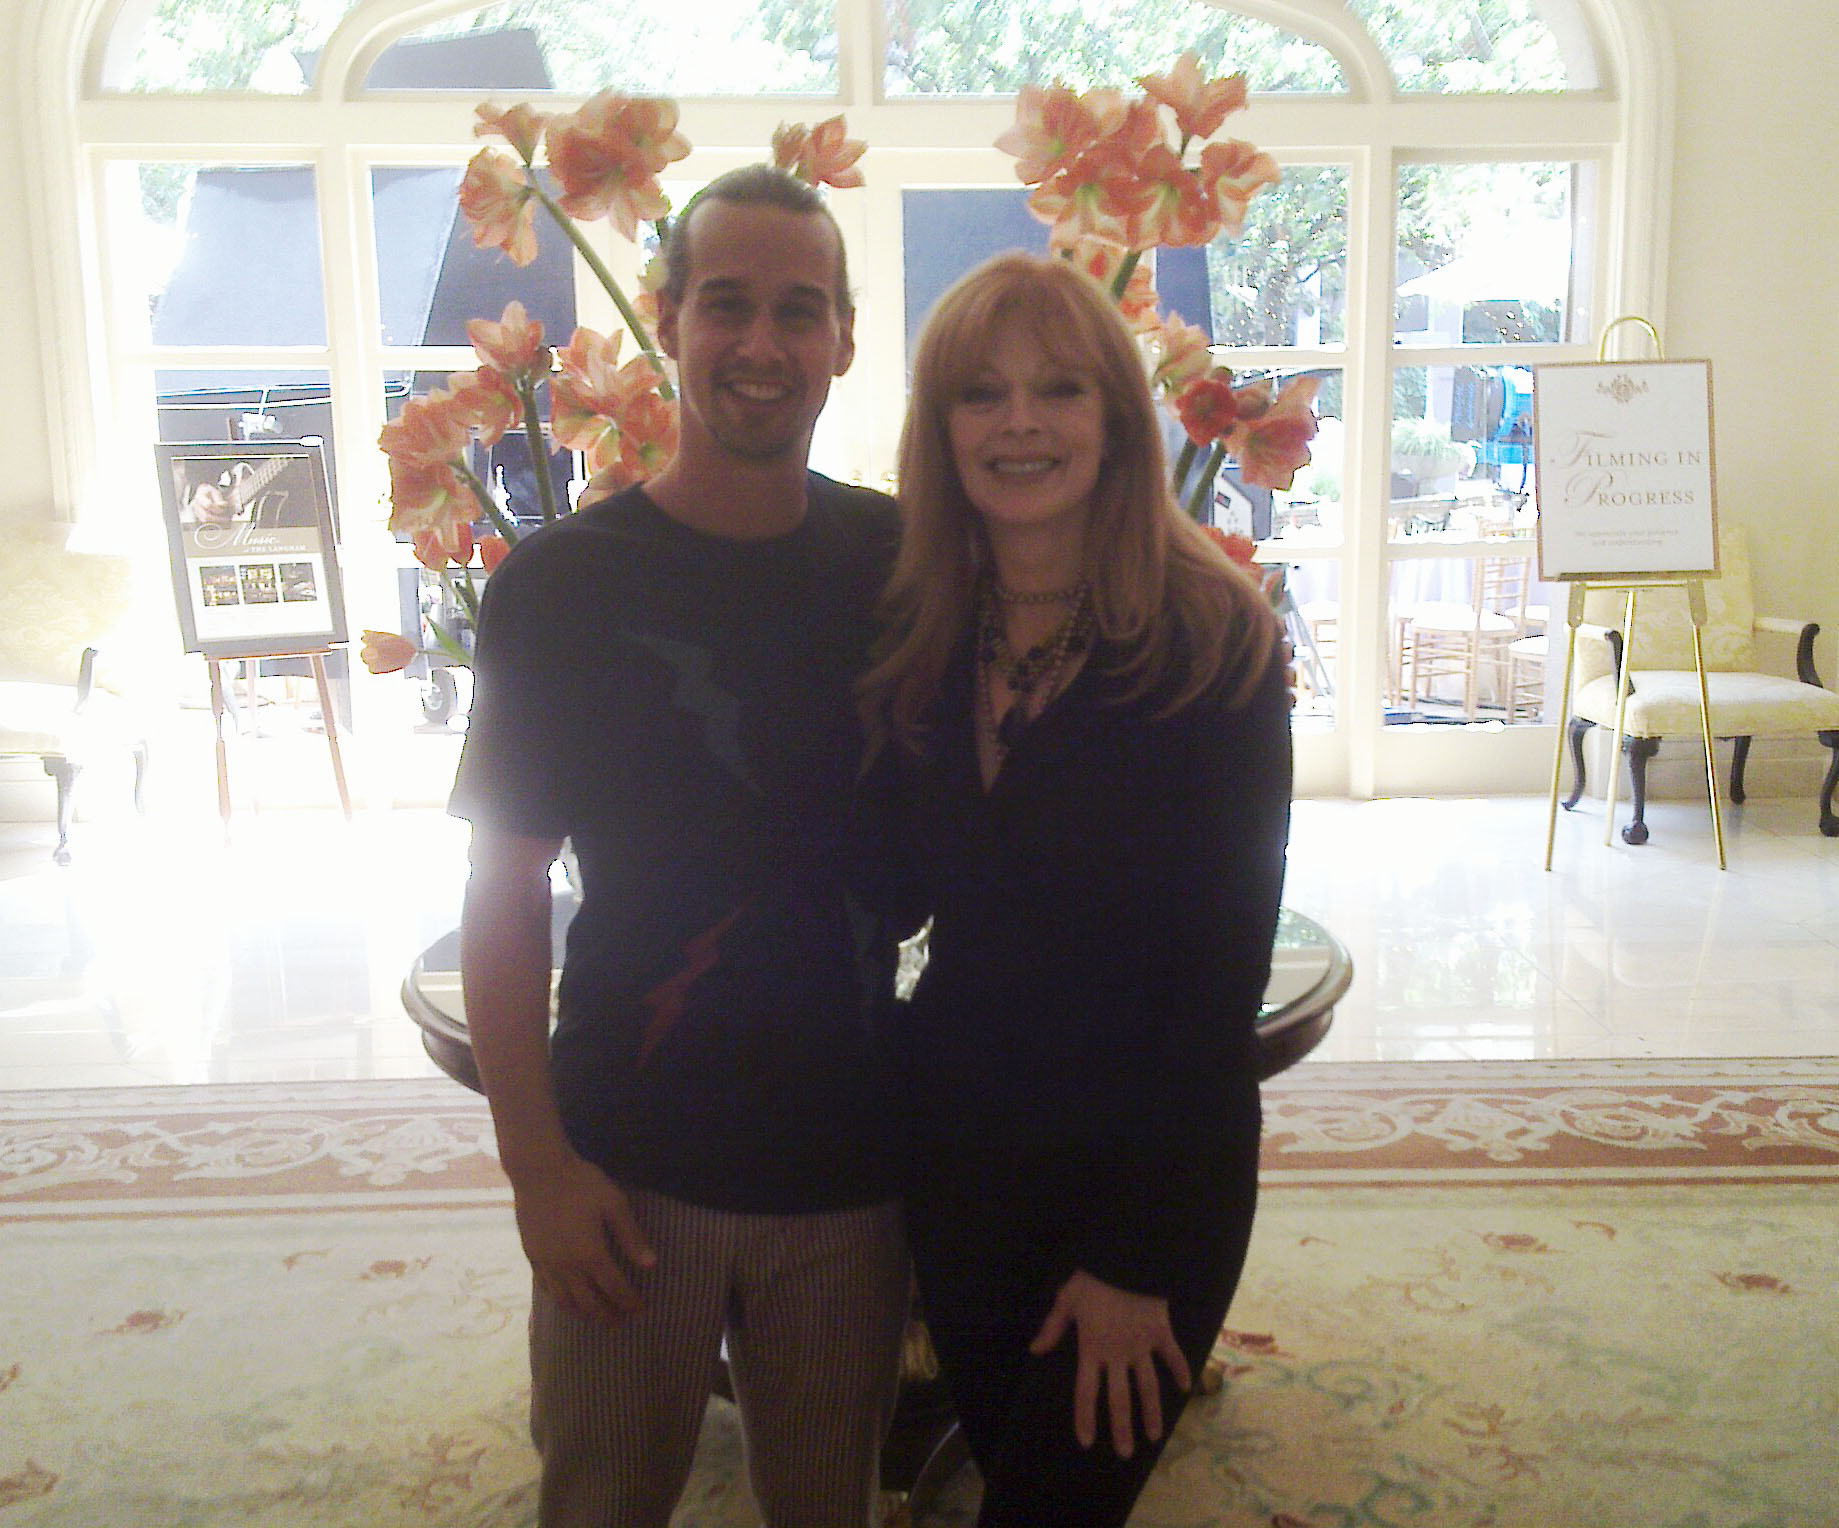 Frances Fisher and Sancho Martin (Lead Party DJ) behind the scenes Beverly Hills Chihuahua 3: Viva La Fiesta!